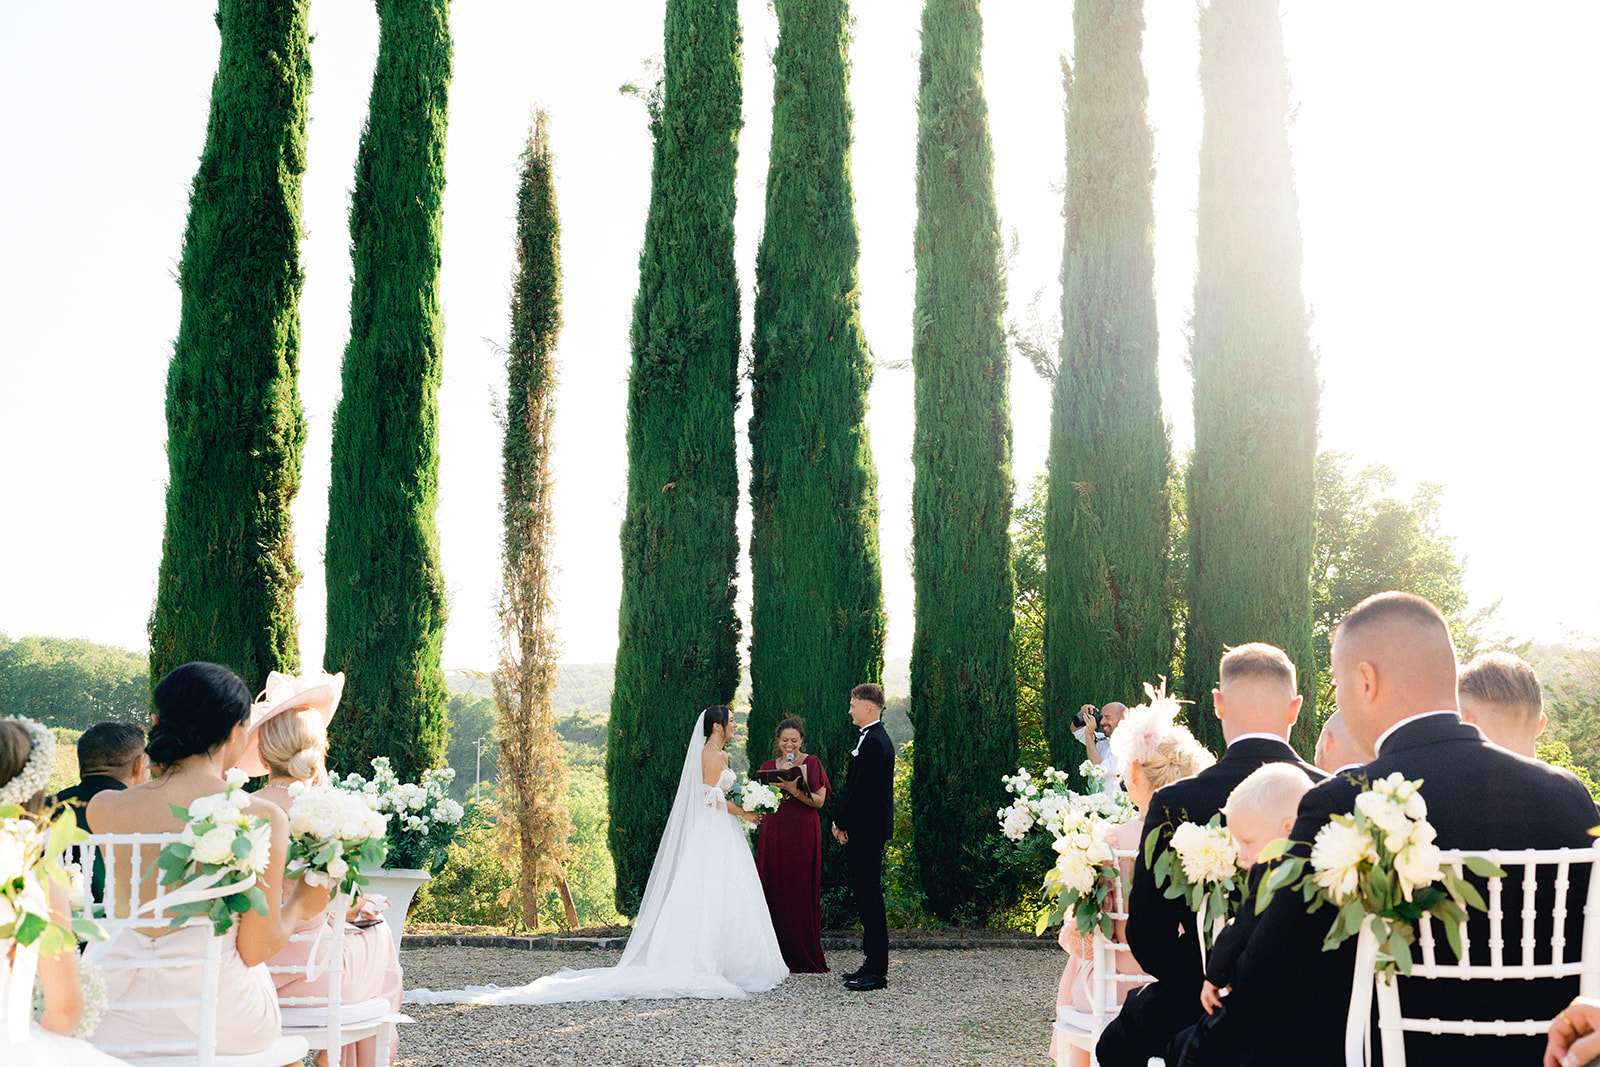 The bride and groom exchange vows under the iconic cypress trees in the garden of Villa La Selva